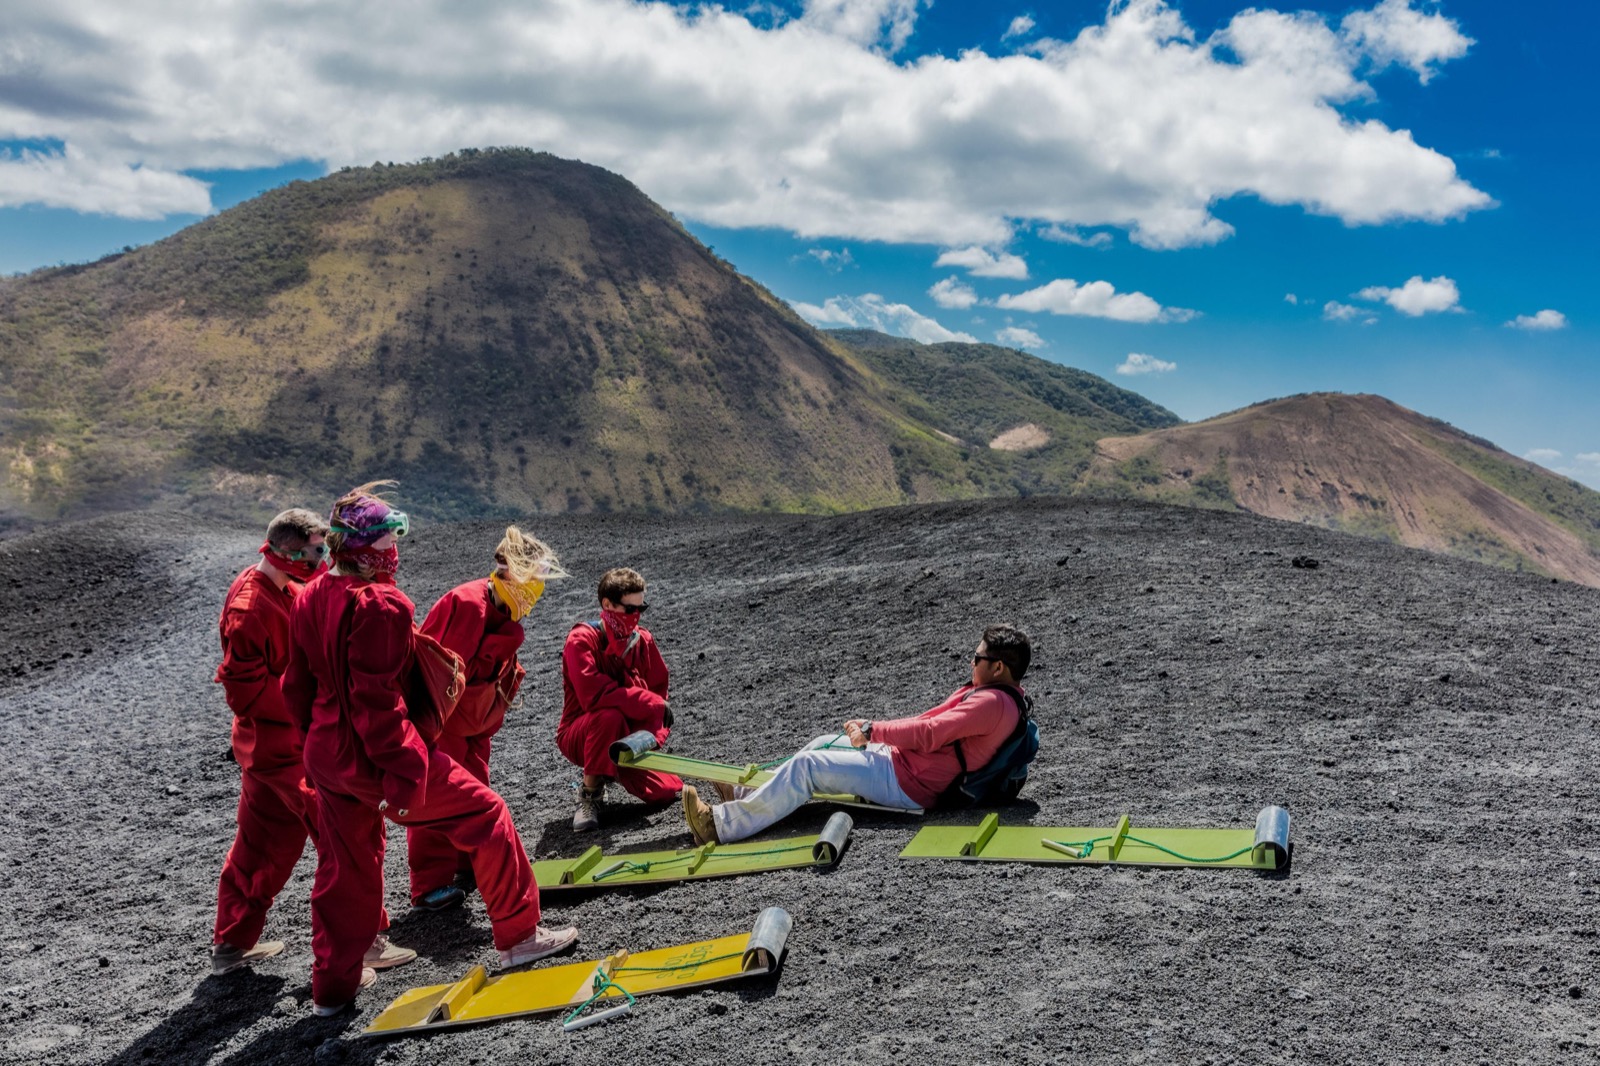 Can We Guess If You’re a Boomer, Gen X’er, Millennial or Gen Z’er Just Based on Your ✈️ Travel Preferences? Go “volcano boarding” on Cerro Negro, Nicaragua